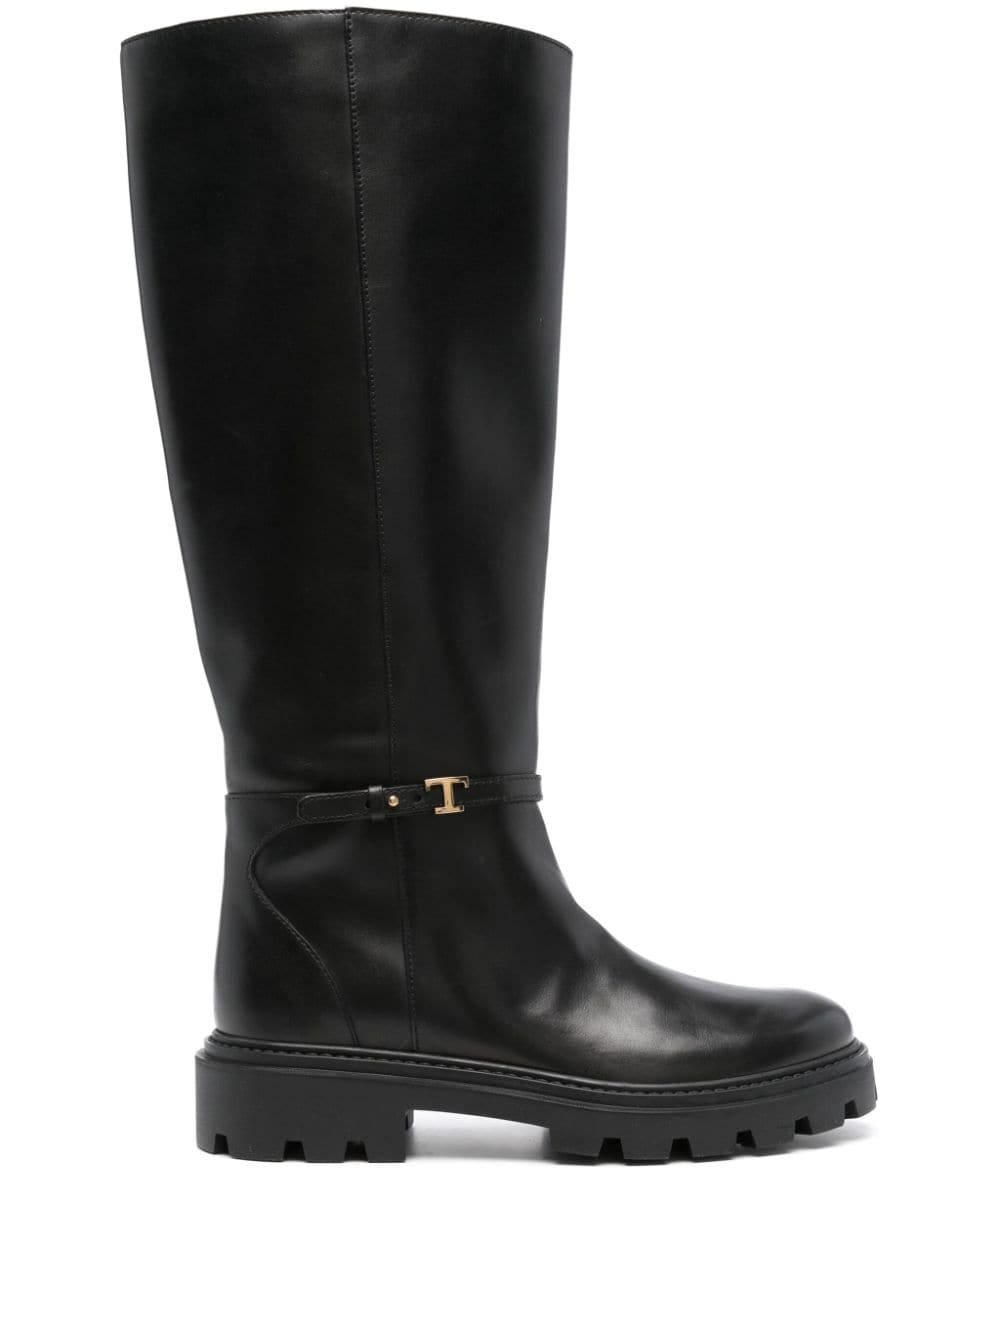 TOD'S BLACK KNEE HIGH BOOTS